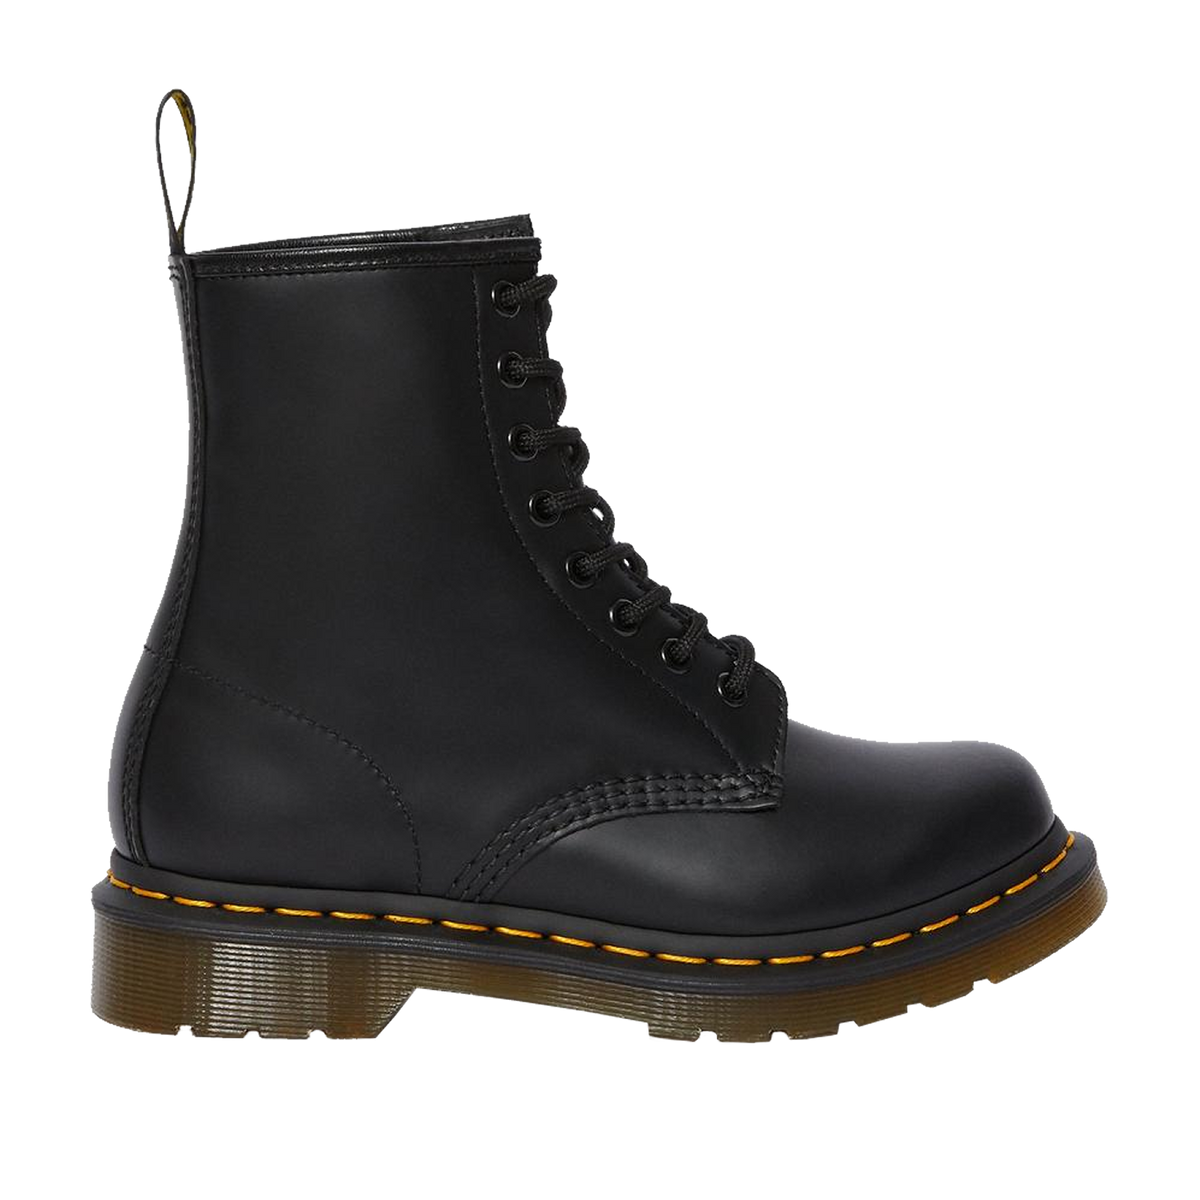 W 1460 SMOOTH LEATHER BOOTS